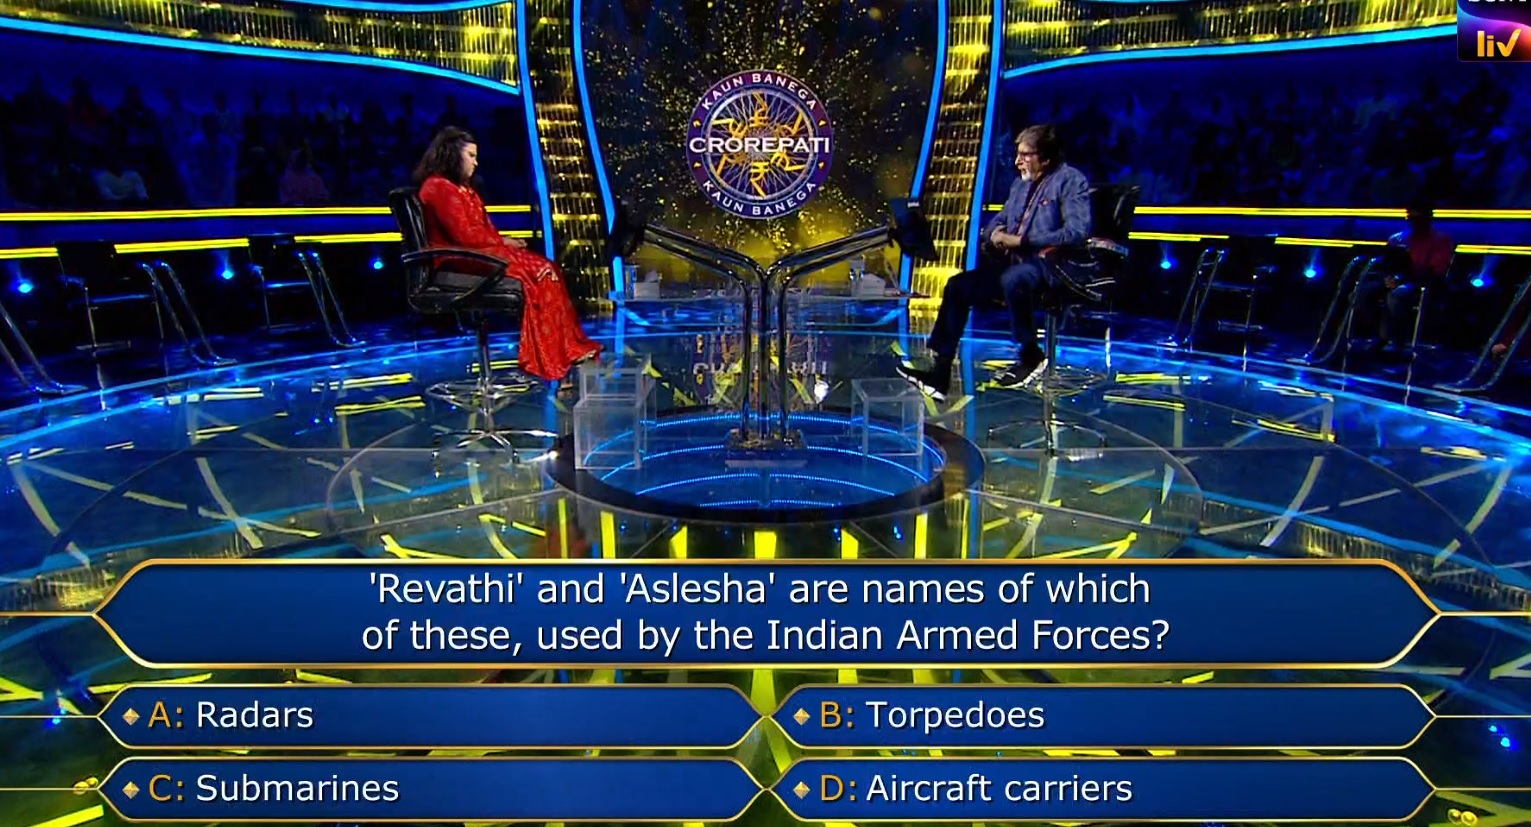 Ques : ‘Revathi’ and ‘Aslesha’ are names of which of these, used by the Indian Armed Forces?